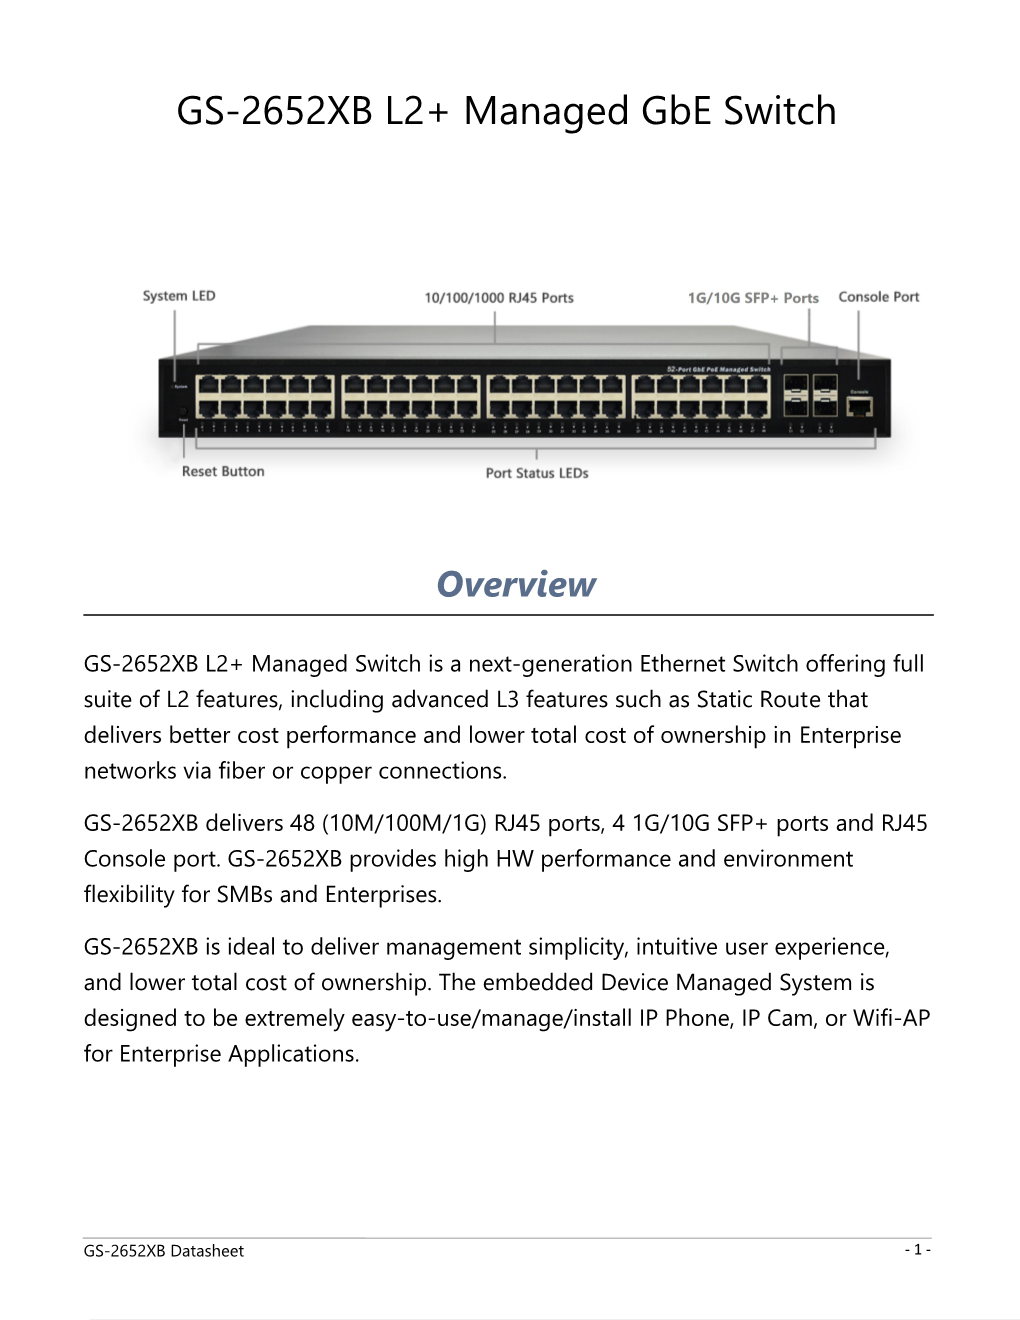 GS-2652XB L2+ Managed Gbe Switch